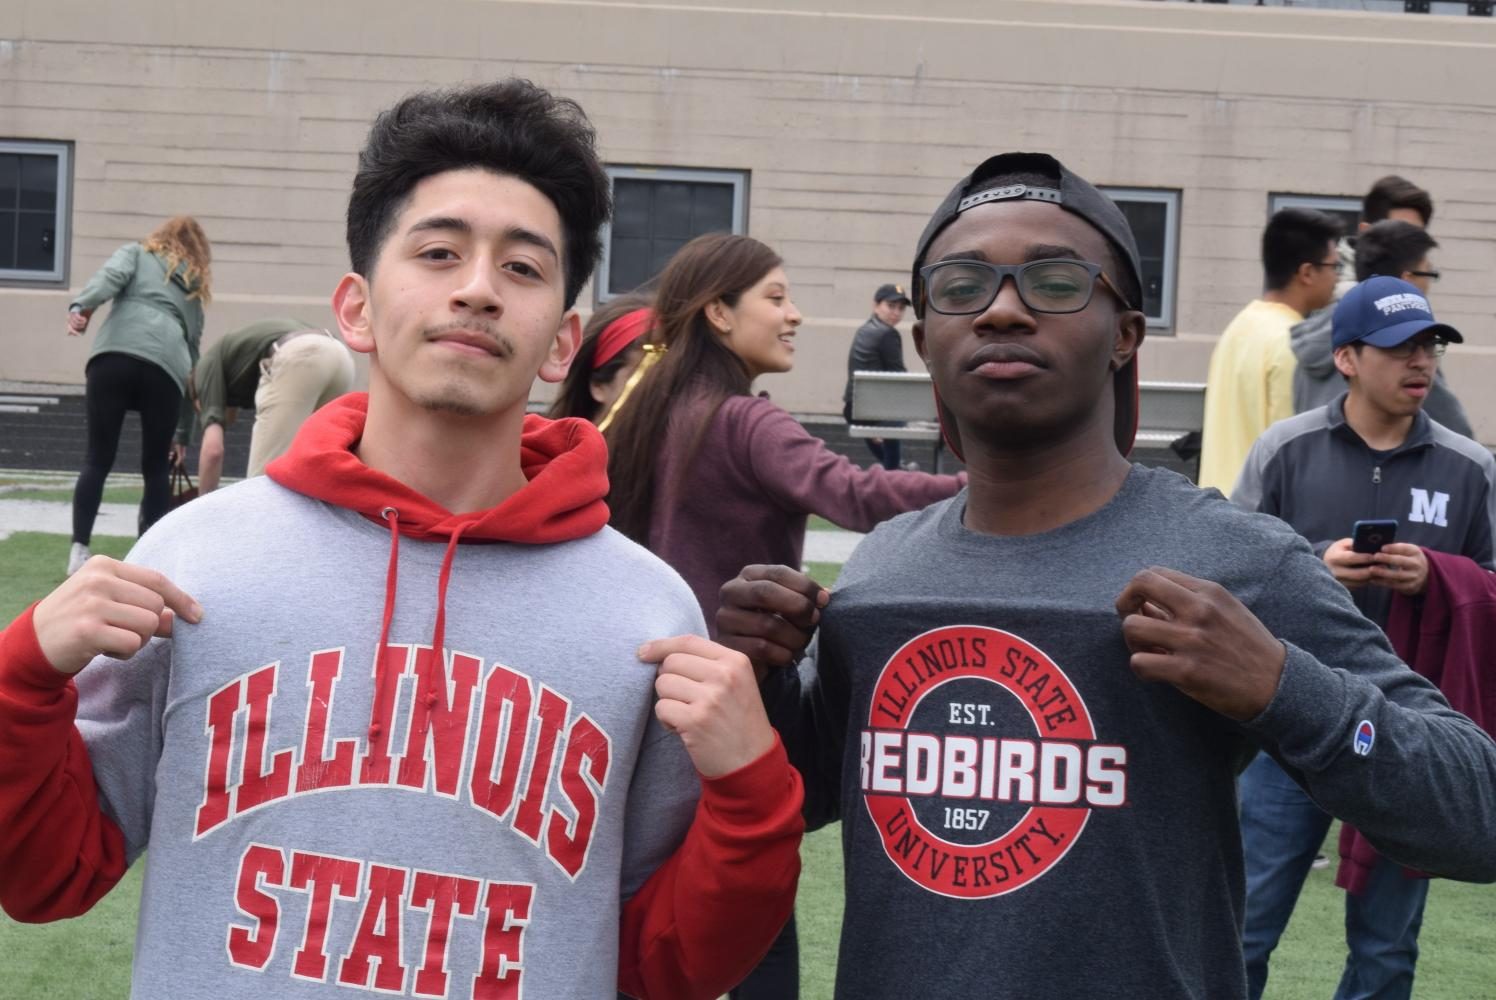 Mario Romero (Left) and Brandon Stanford (Right) will be attending Illinois State University together